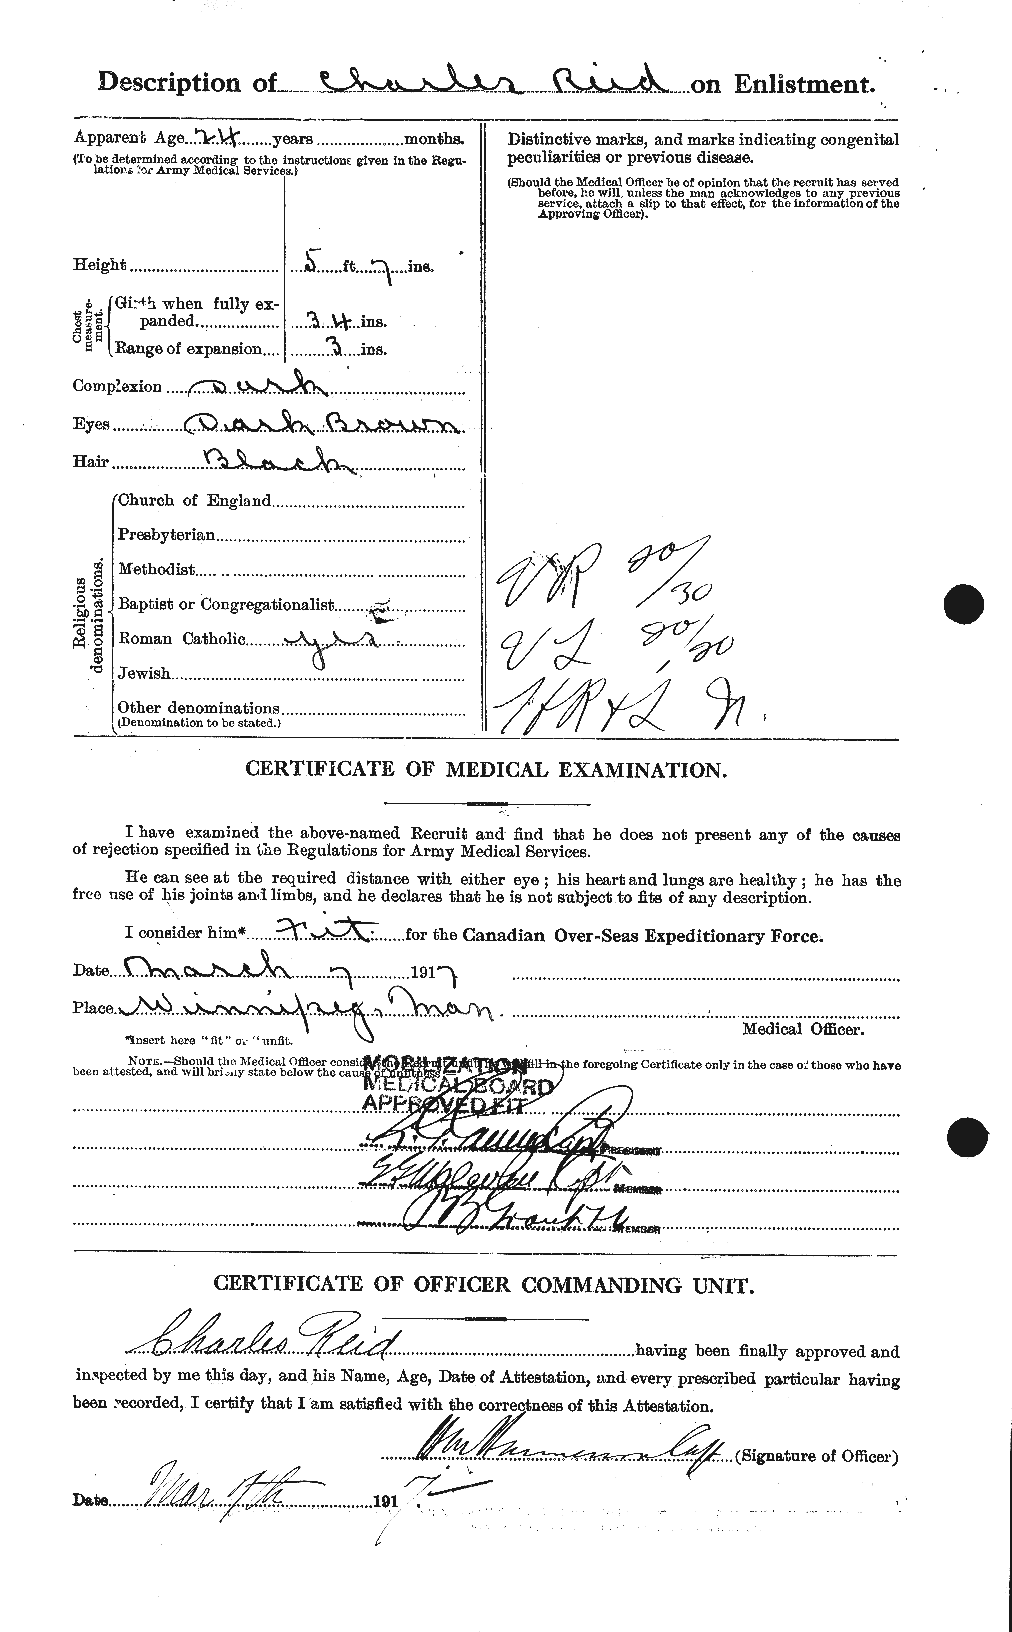 Personnel Records of the First World War - CEF 597877b